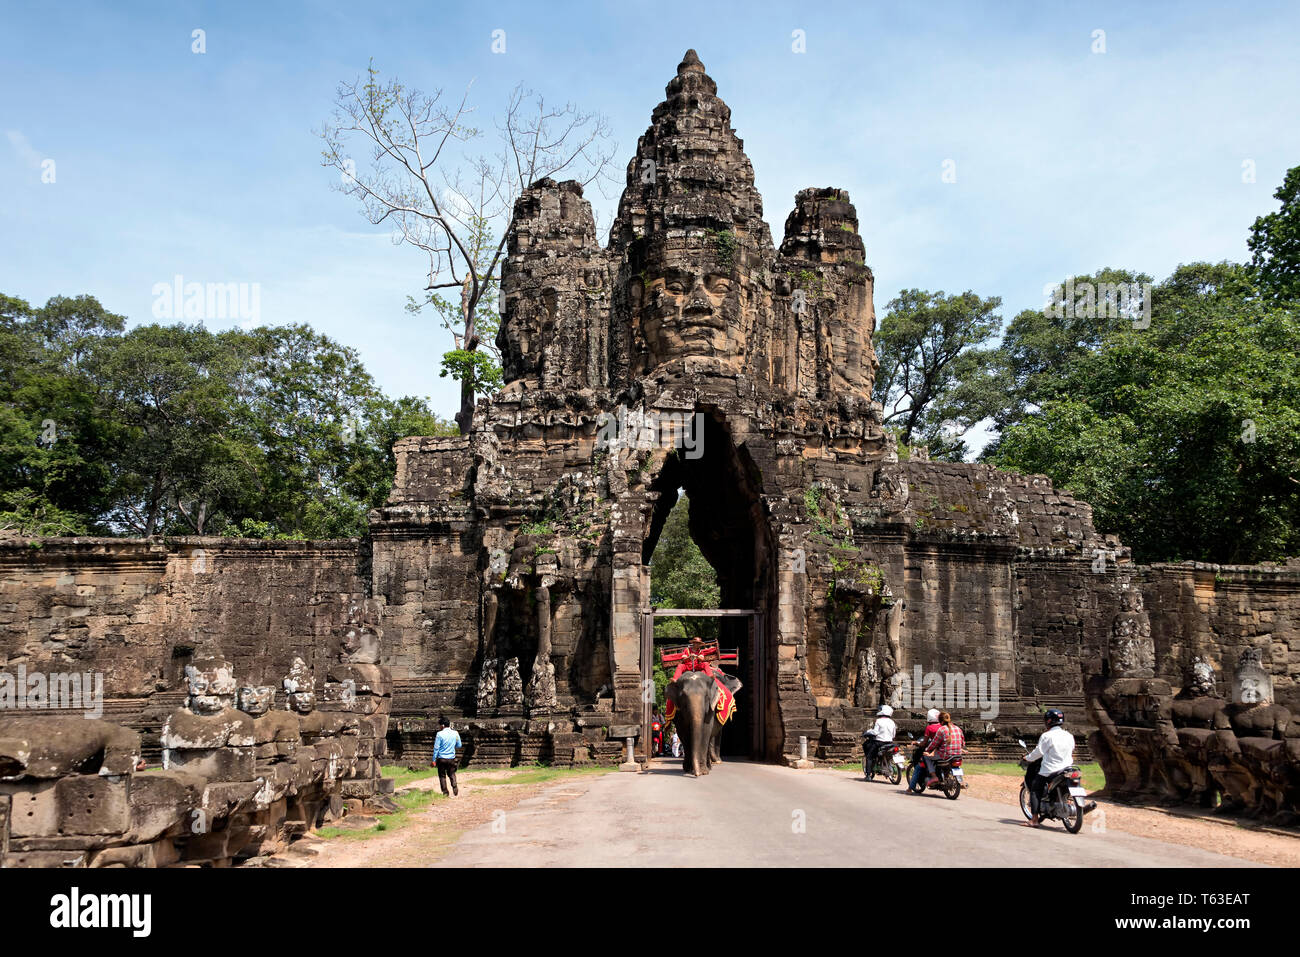 Elephants and locals on scooters crossing the South Gate of Angkor Thom, in Siem Reap, Cambodia Stock Photo